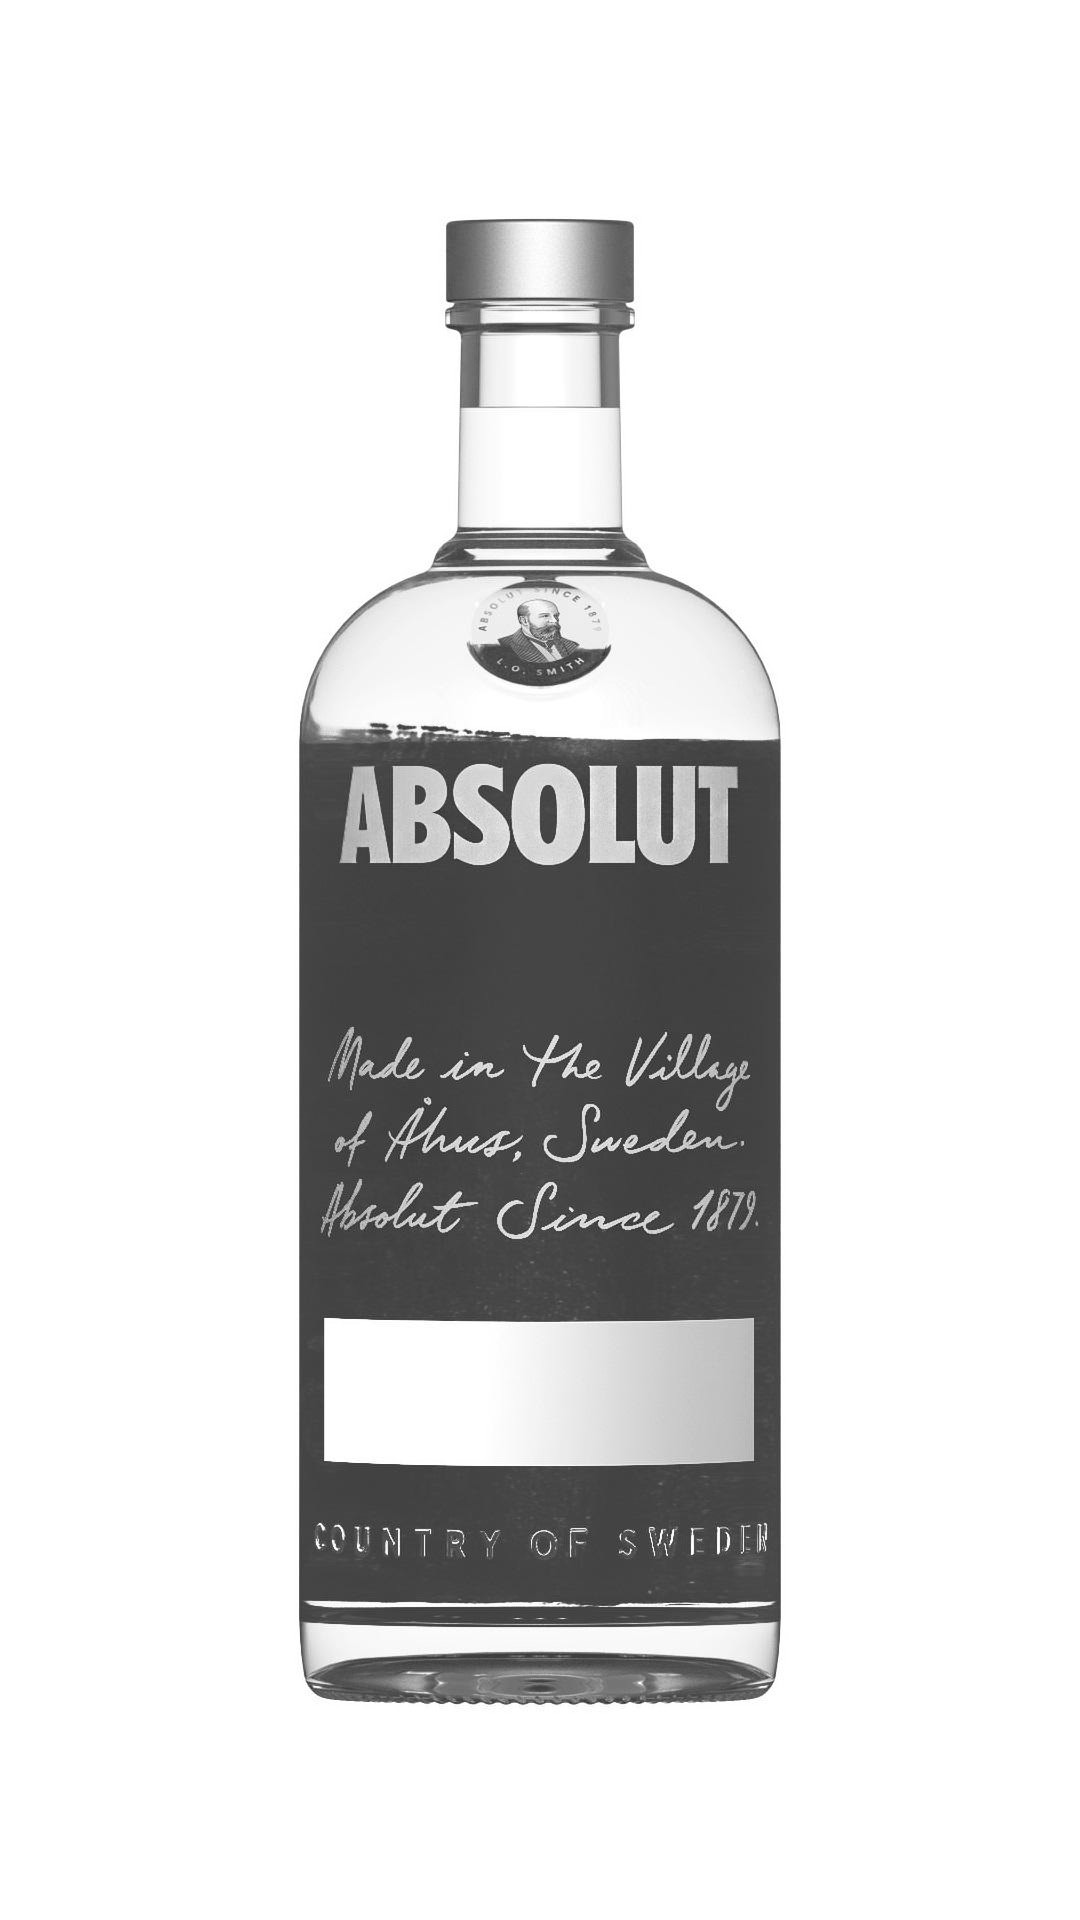  ABSOLUT SINCE 1879 L.O. SMITH ABSOLUT MADE IN THE VILLAGE OF ÅHUS, SWEDEN. ABSOLUT SINCE 1879. COUNTRY OF SWEDEN